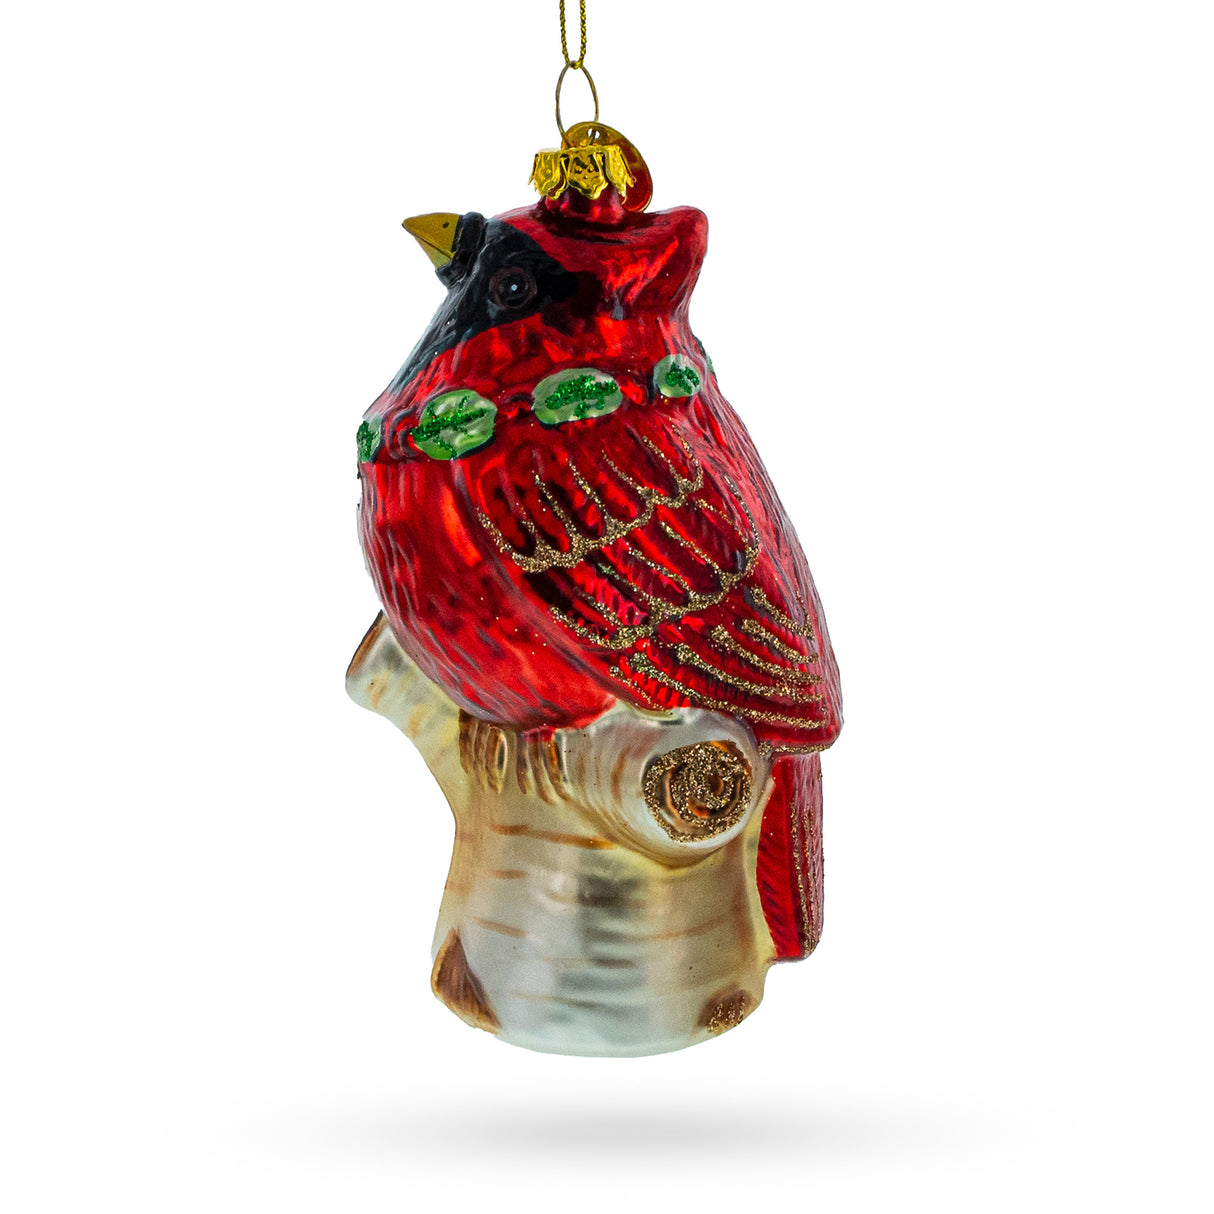 BestPysanky online gift shop sells mouth blown hand made painted xmas decor decorations figurine unique luxury collectible heirloom vintage whimsical elegant festive balls baubles old fashioned european german collection artisan hanging personalized